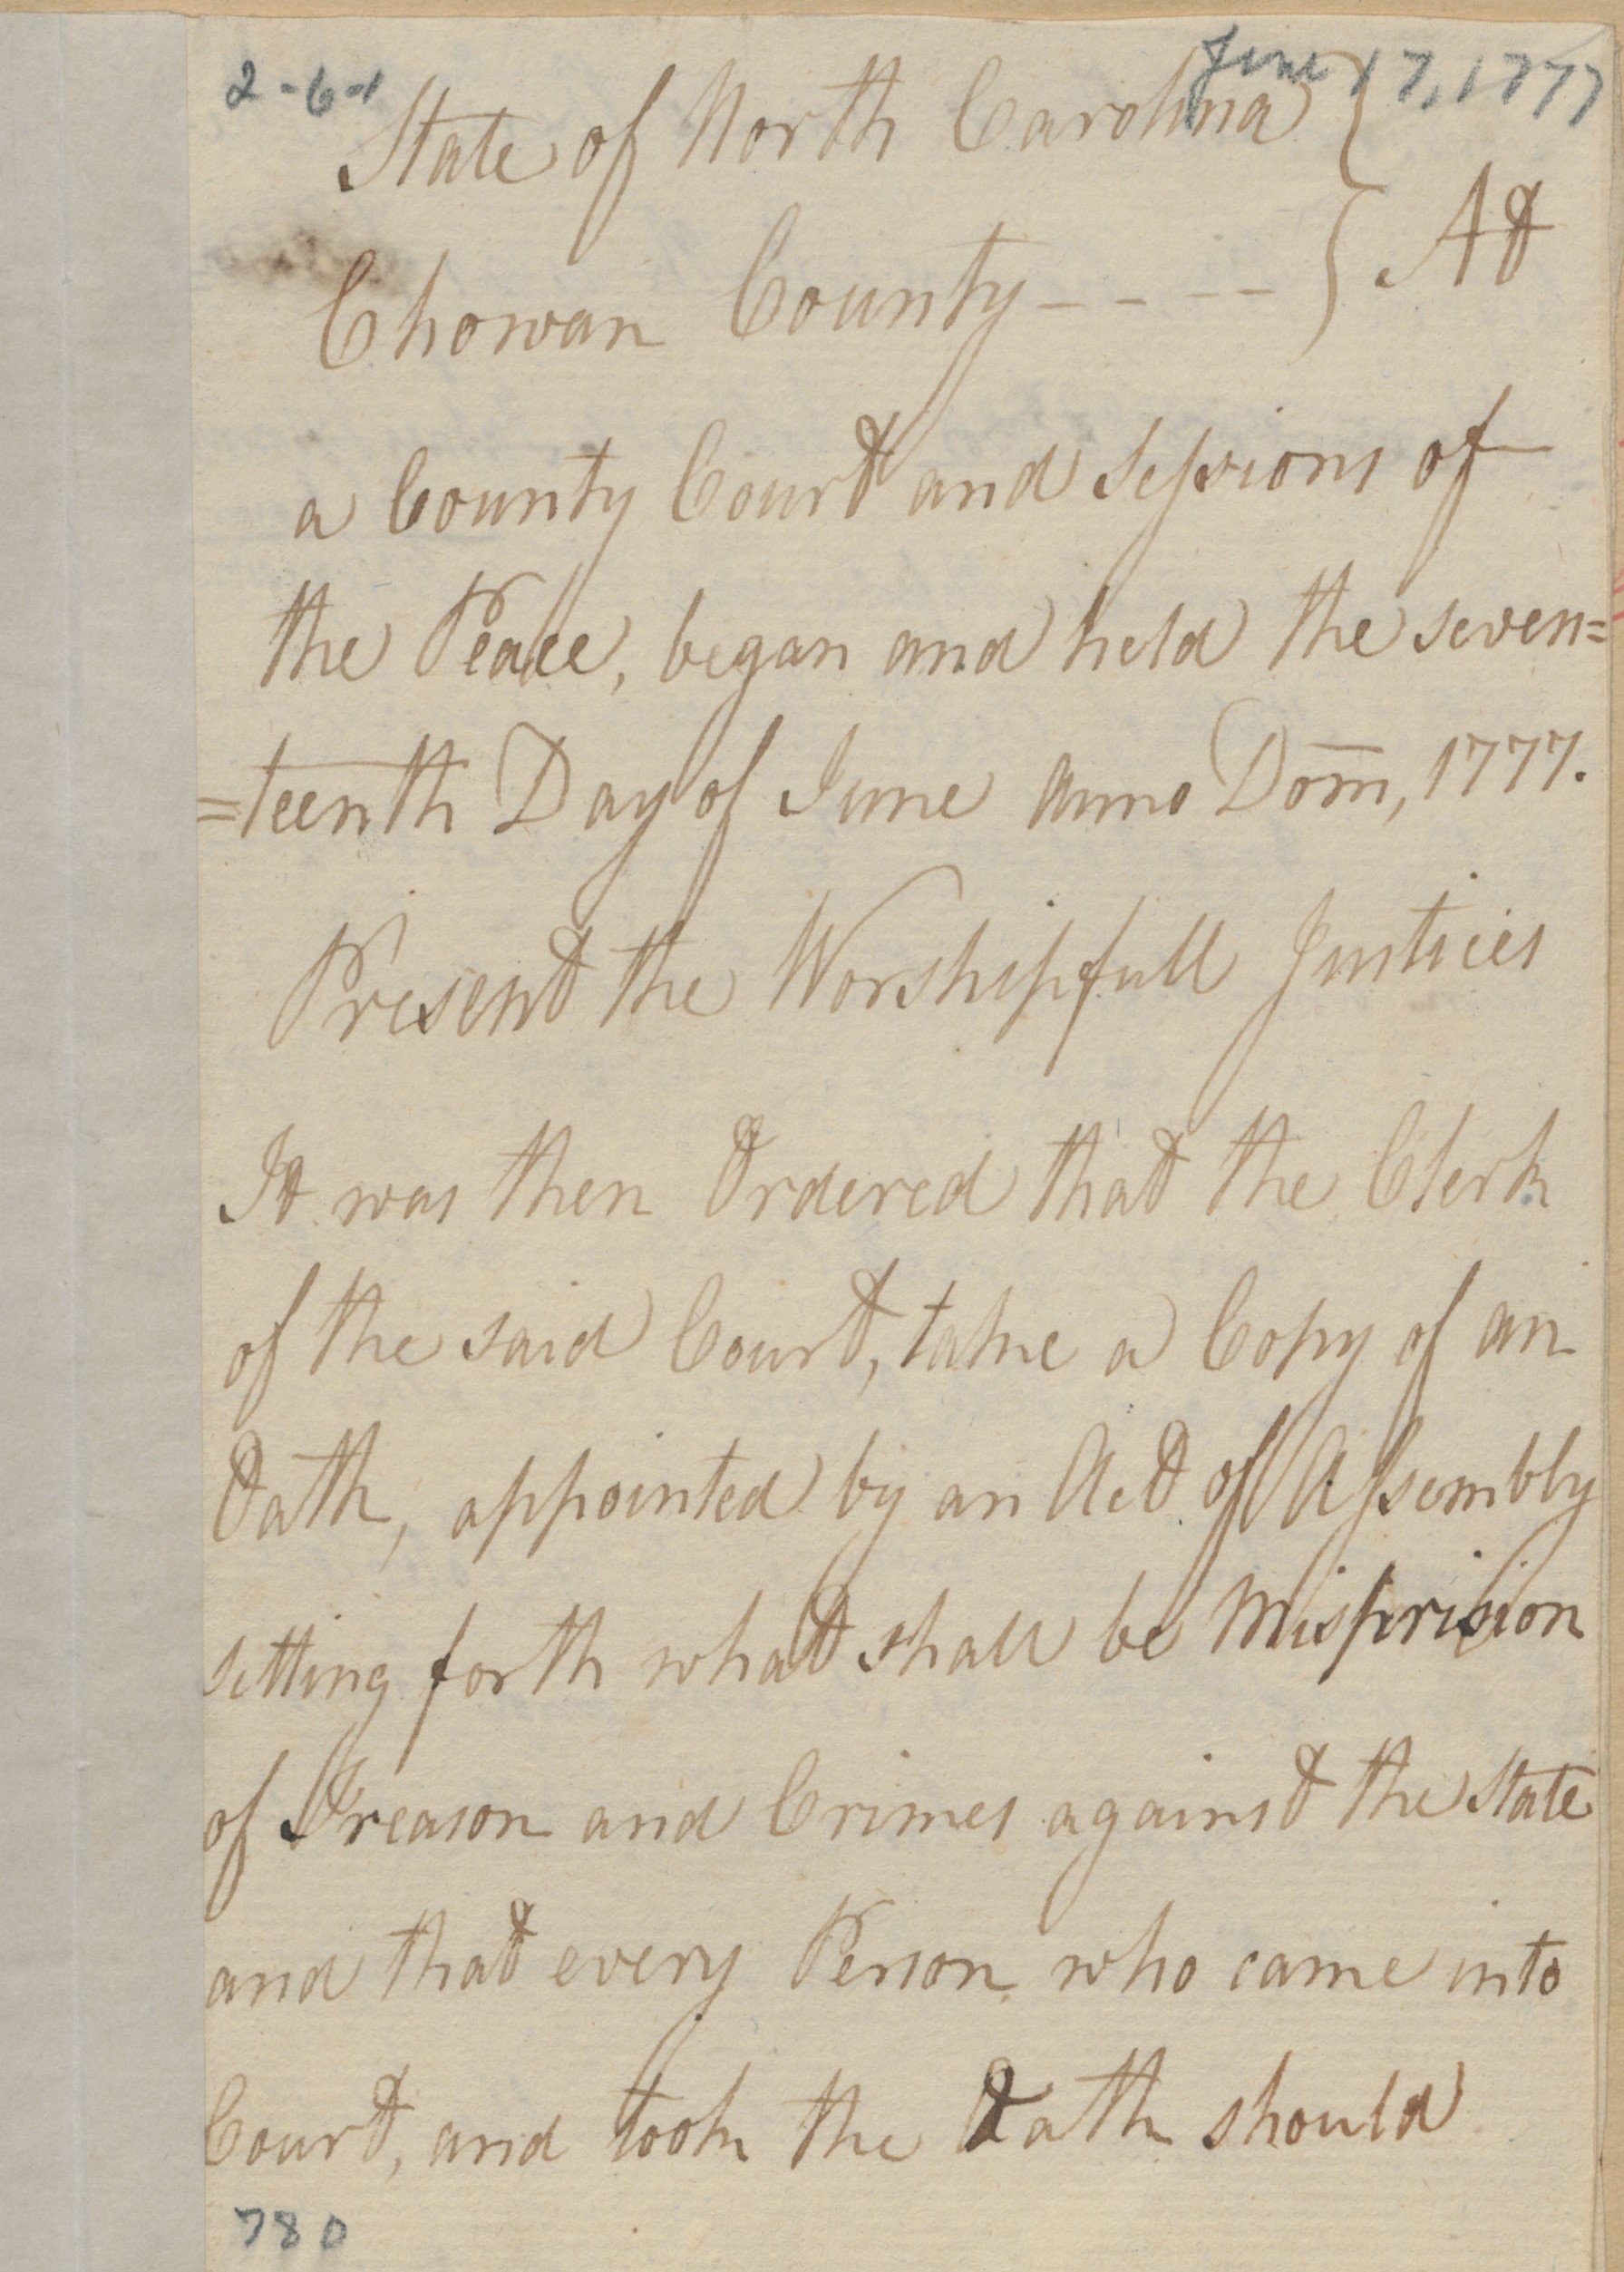 Order of the Chowan County Court, 17 June 1777, page 1